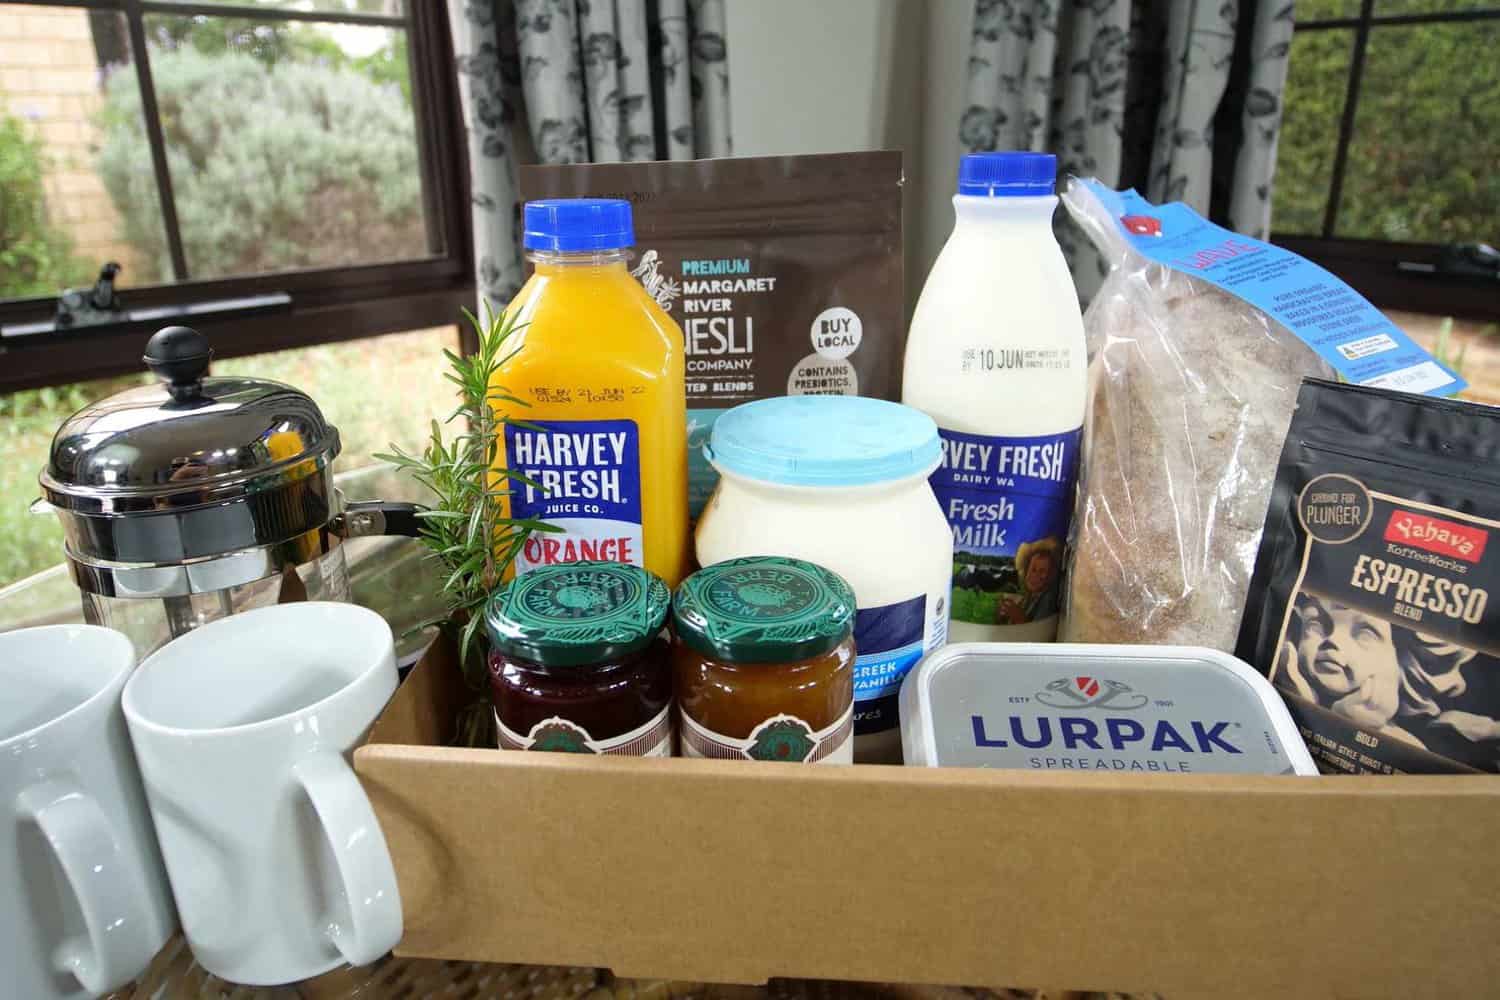 A selection of breakfast items including fresh orange juice, milk, muesli, yogurt, jams, butter, and espresso coffee, all arranged neatly in a box, ready for a delightful morning meal in a room with garden view curtains.